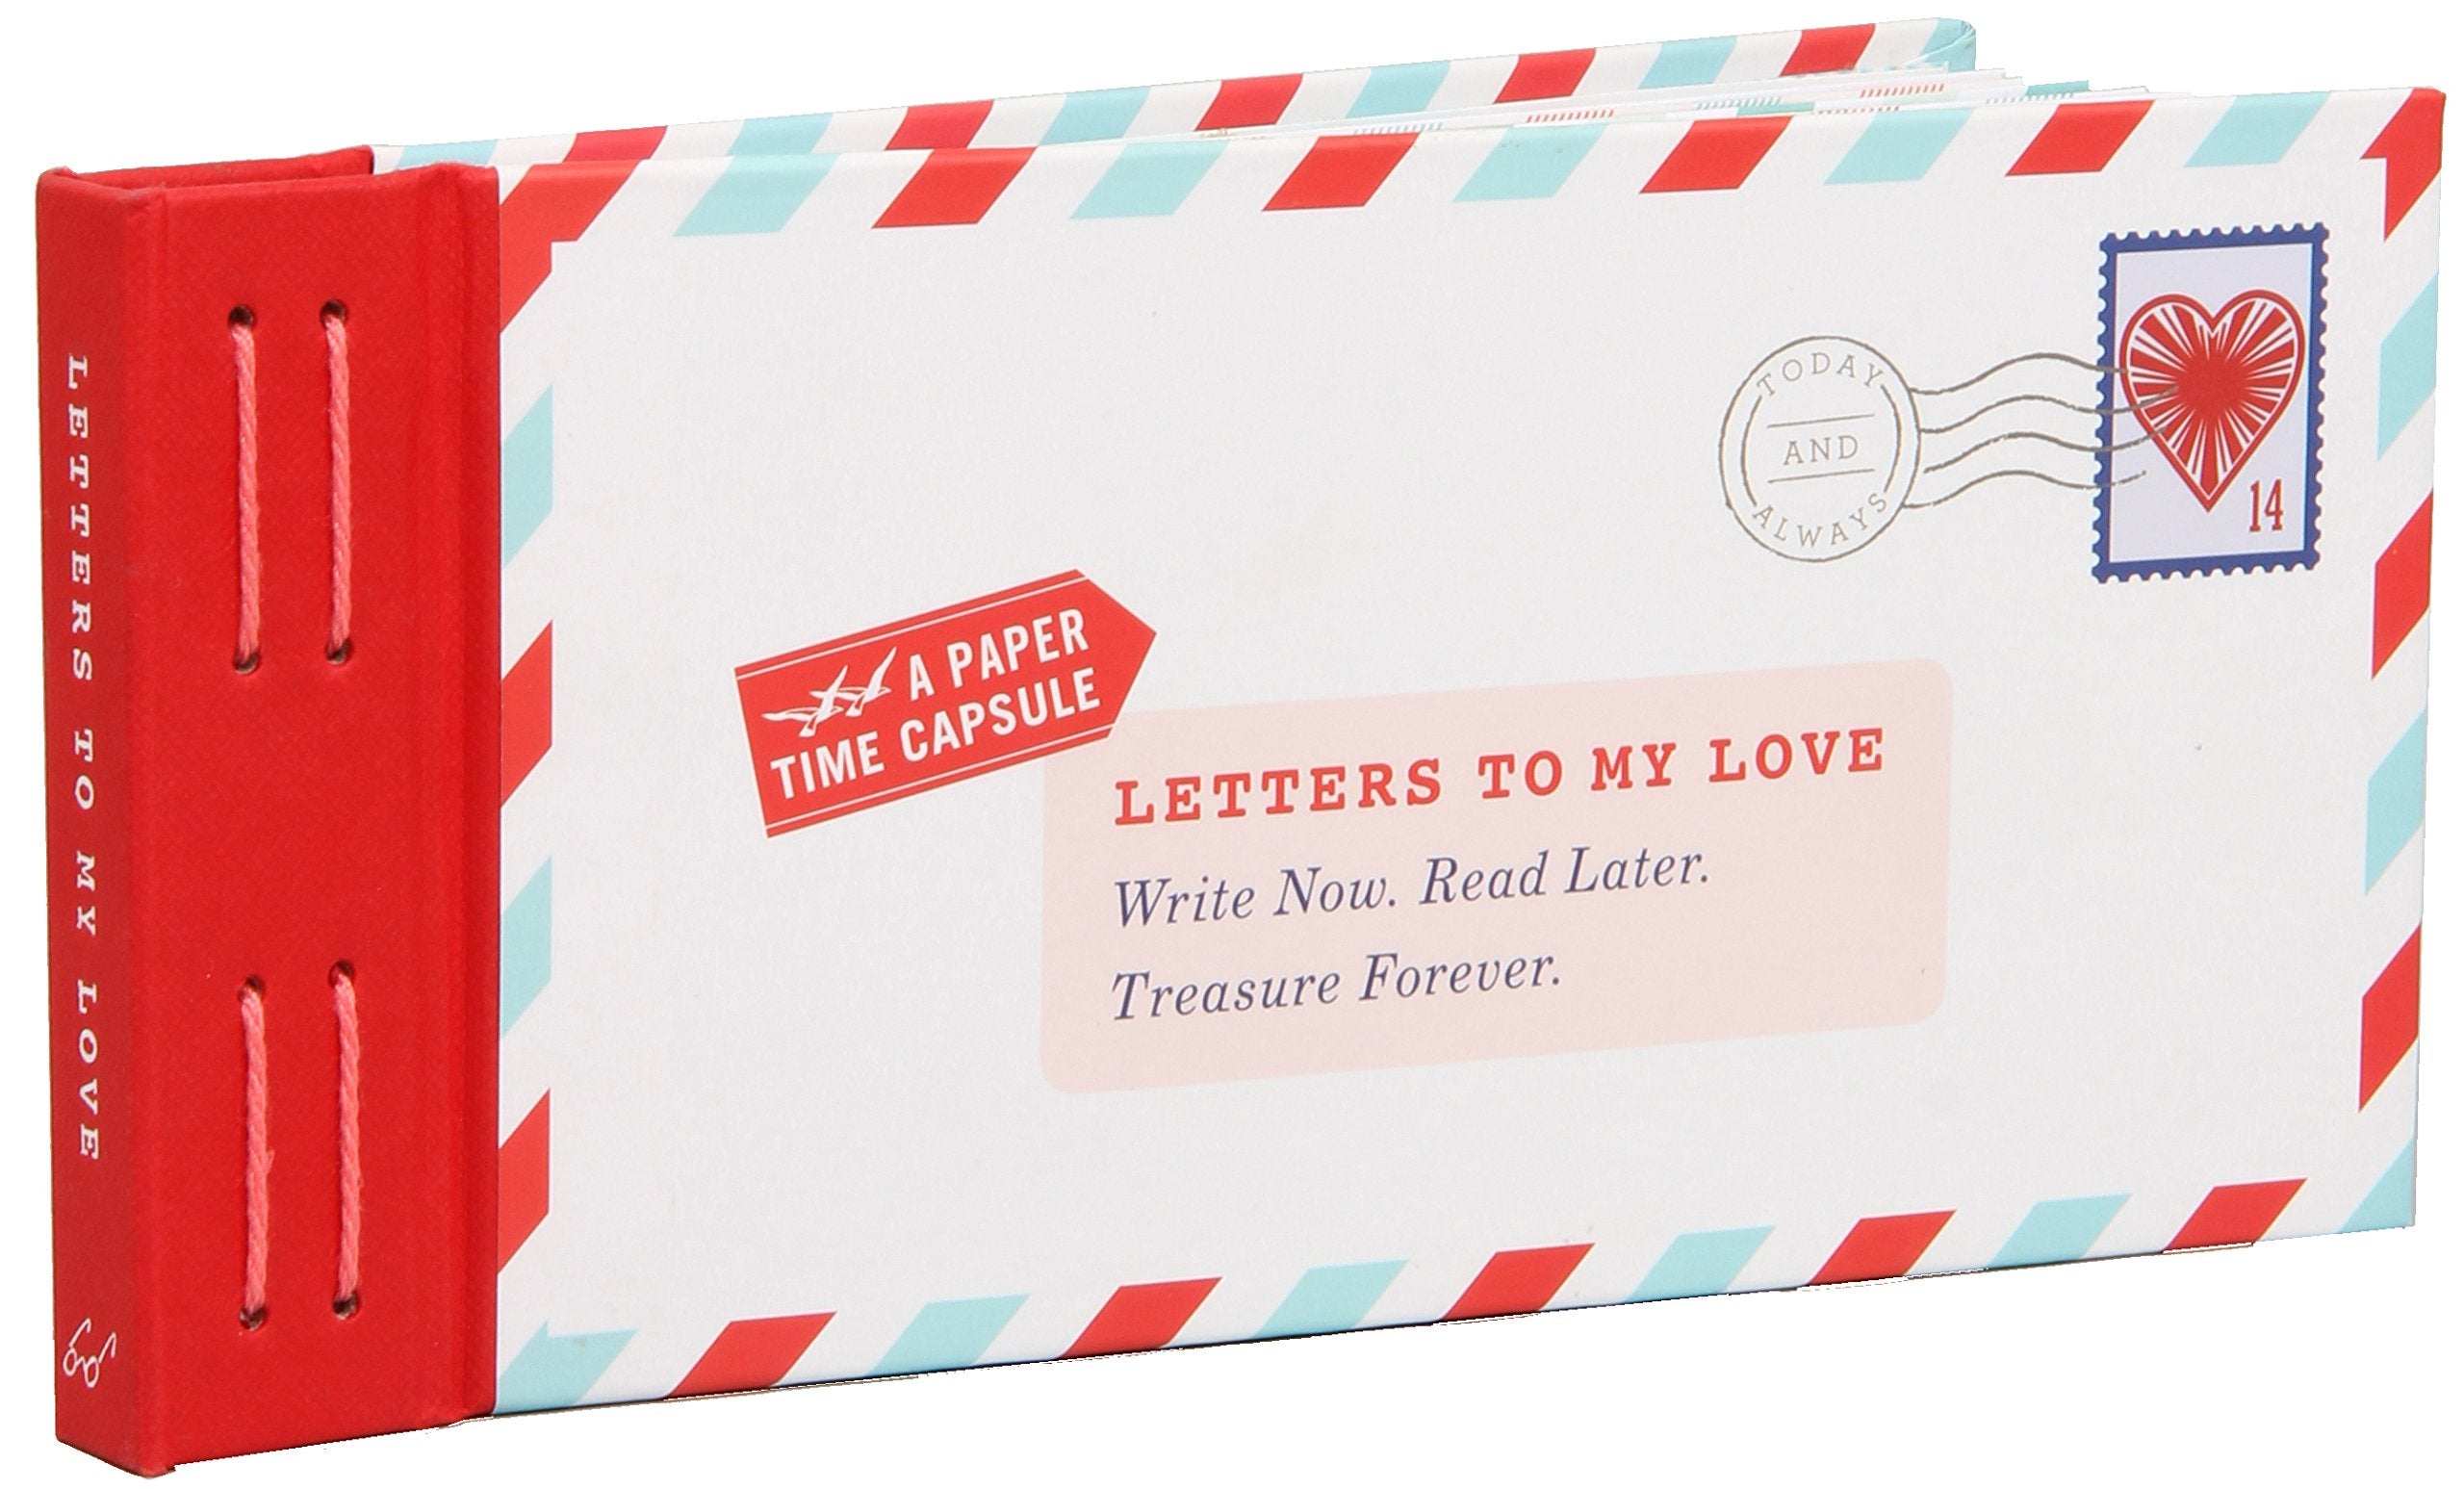 Lea Redmond Letters to My Love Novelty Book